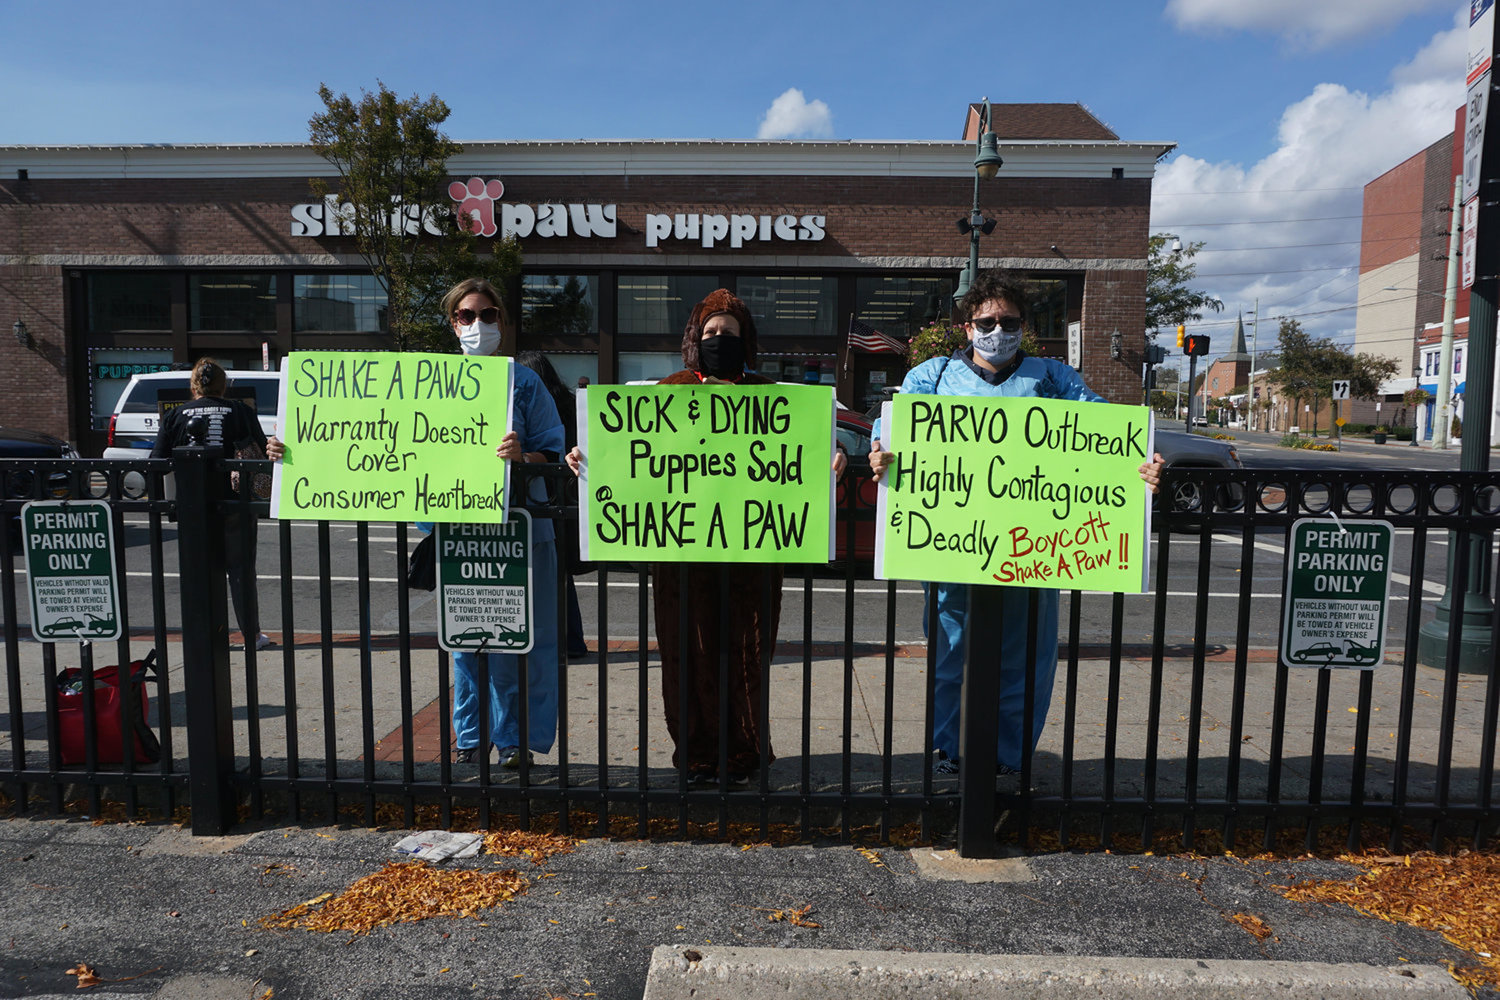 The state attorney general’s office has filed suit against Shake a Paw stores in Lynbrook and Hicksville, after many customers alleged that they purchased dogs from the businesses that later died. Protesters demonstrated outside the Lynbrook store in October 2020.